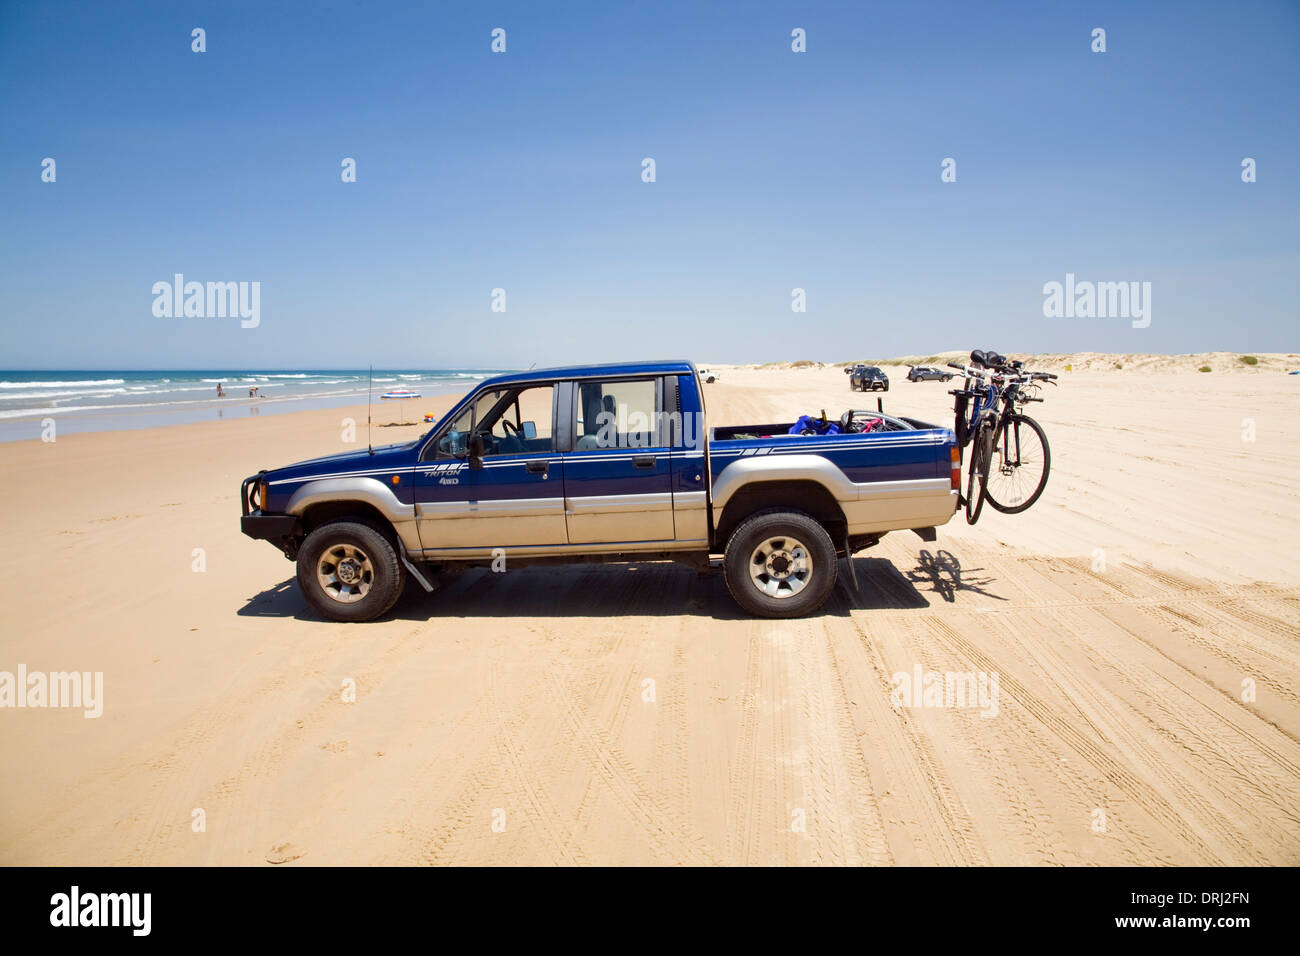 4 x 4 vehicles can be driven onto Stockton beach sand dures, worimi conservation lands, nelson bay,port stephens,Australia Stock Photo